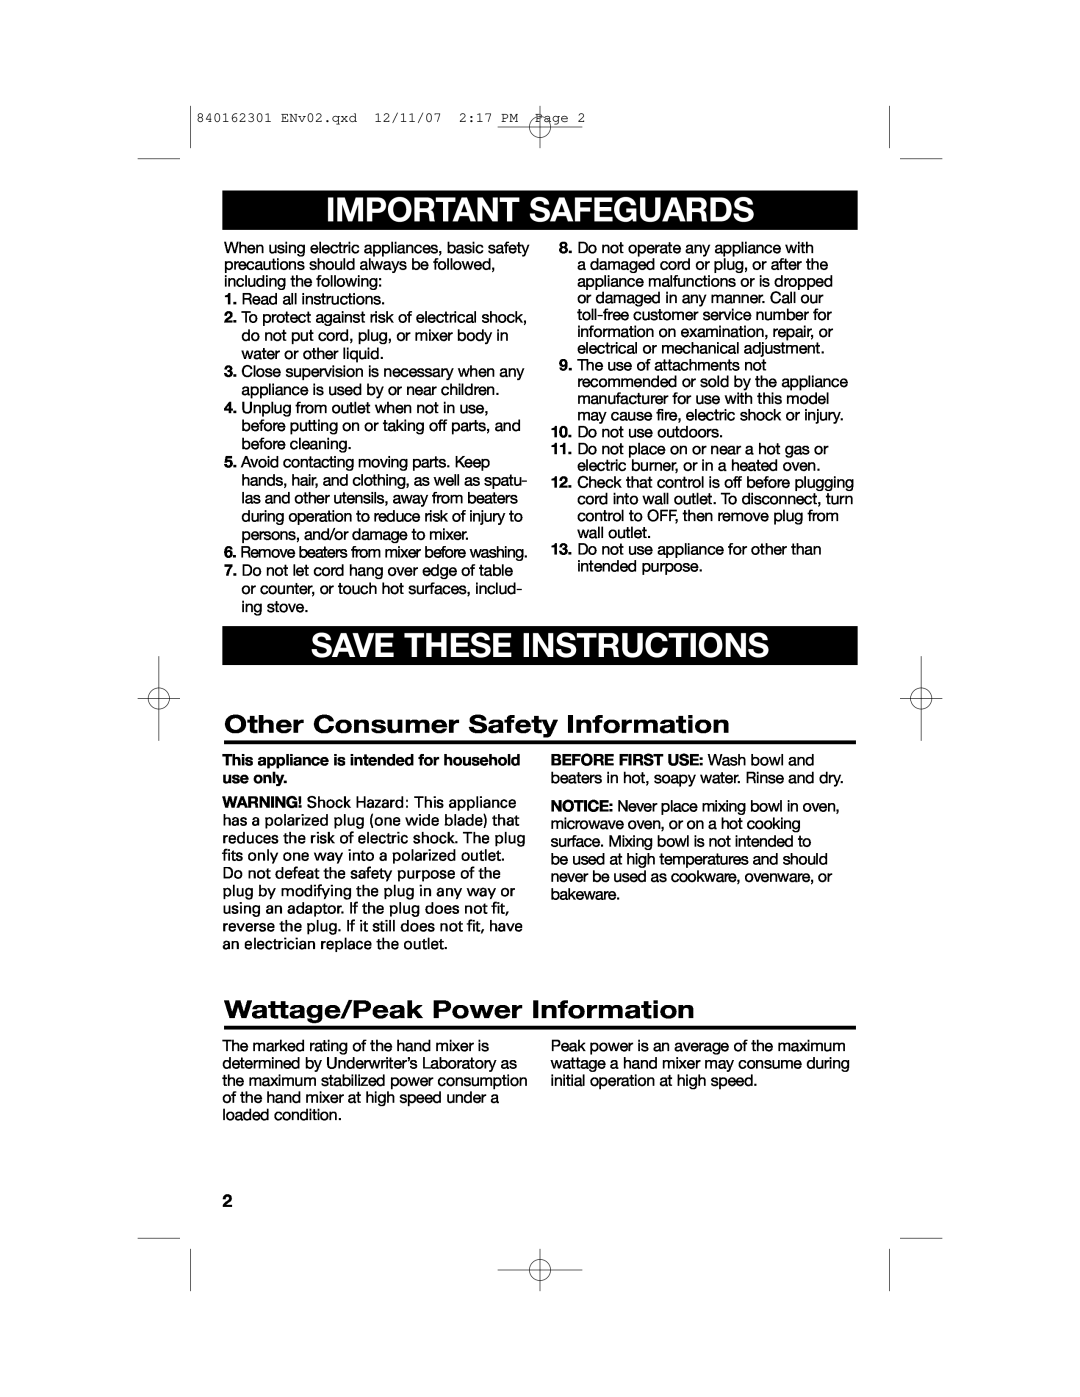 Hamilton Beach Hand/Stand Mixer manual Important Safeguards, Save These Instructions, Other Consumer Safety Information 